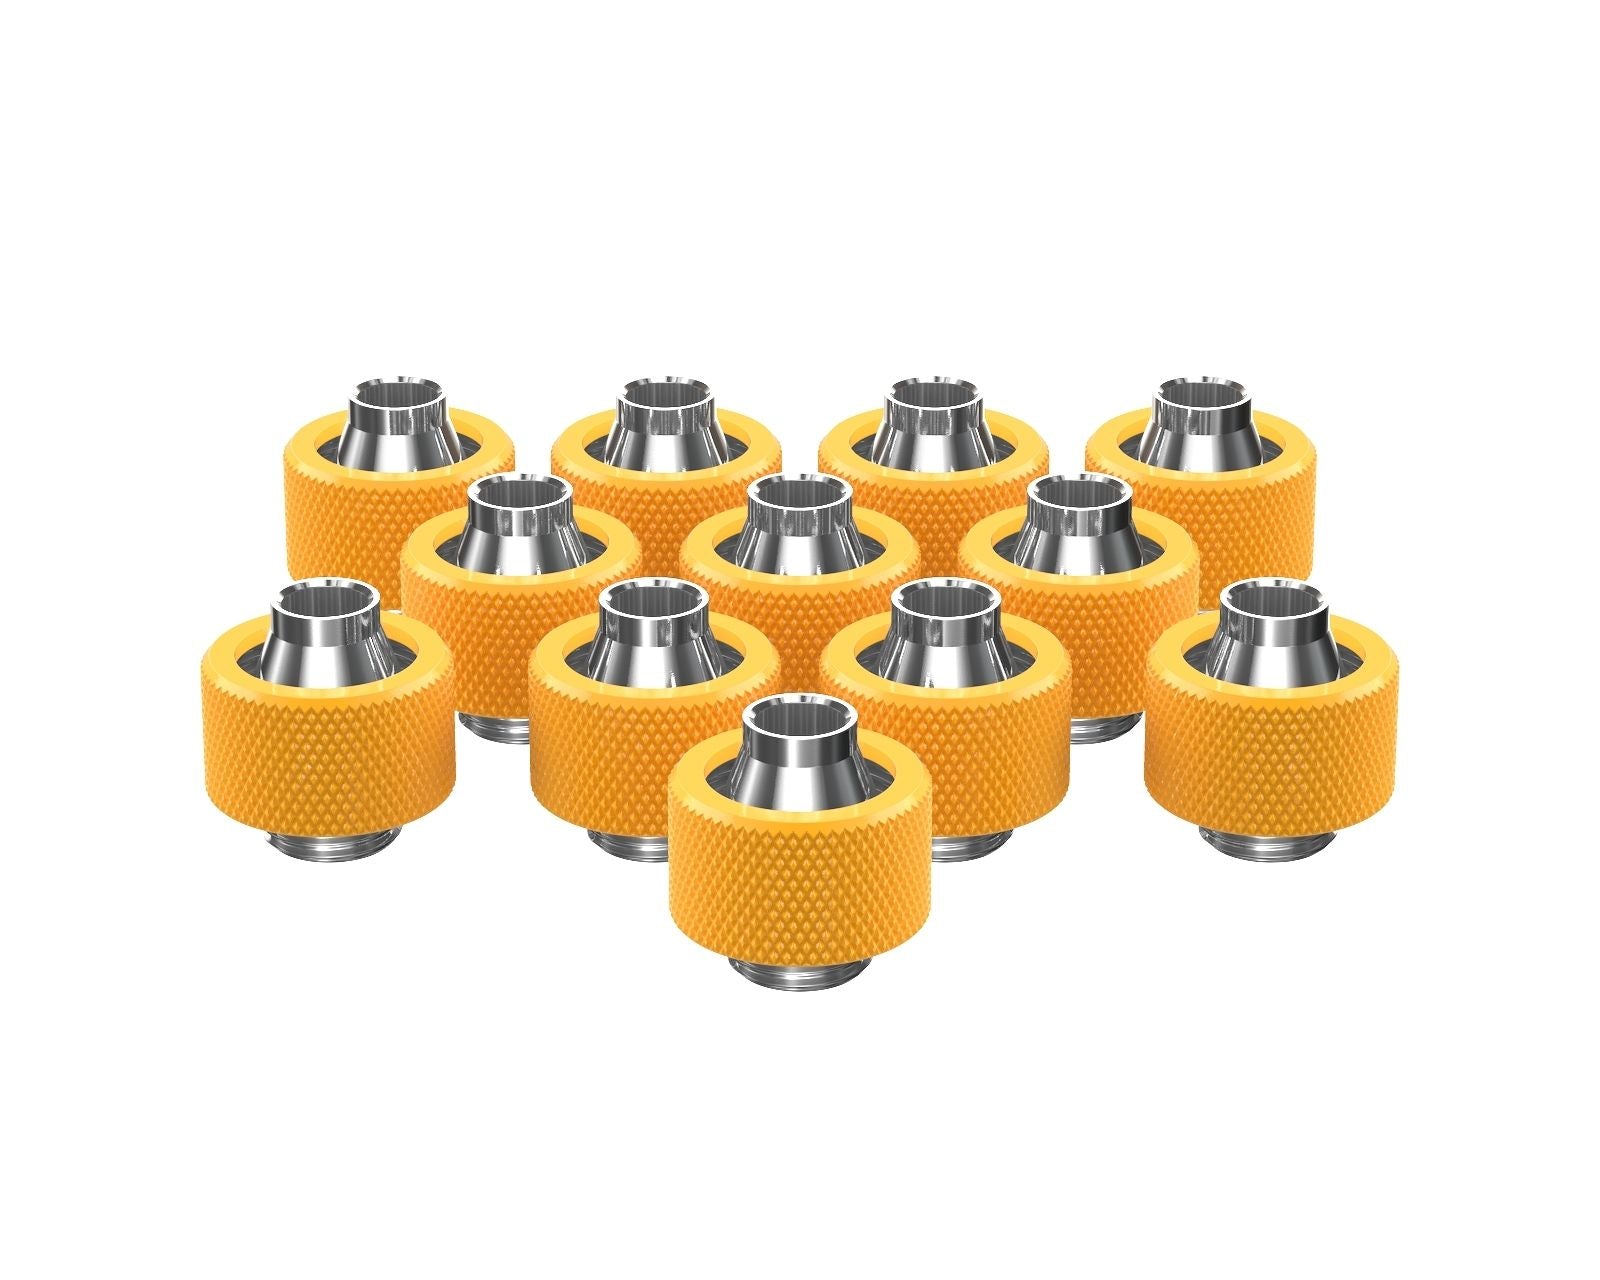 PrimoChill SecureFit SX - Premium Compression Fitting For 3/8in ID x 5/8in OD Flexible Tubing 12 Pack (F-SFSX58-12) - Available in 20+ Colors, Custom Watercooling Loop Ready - Yellow